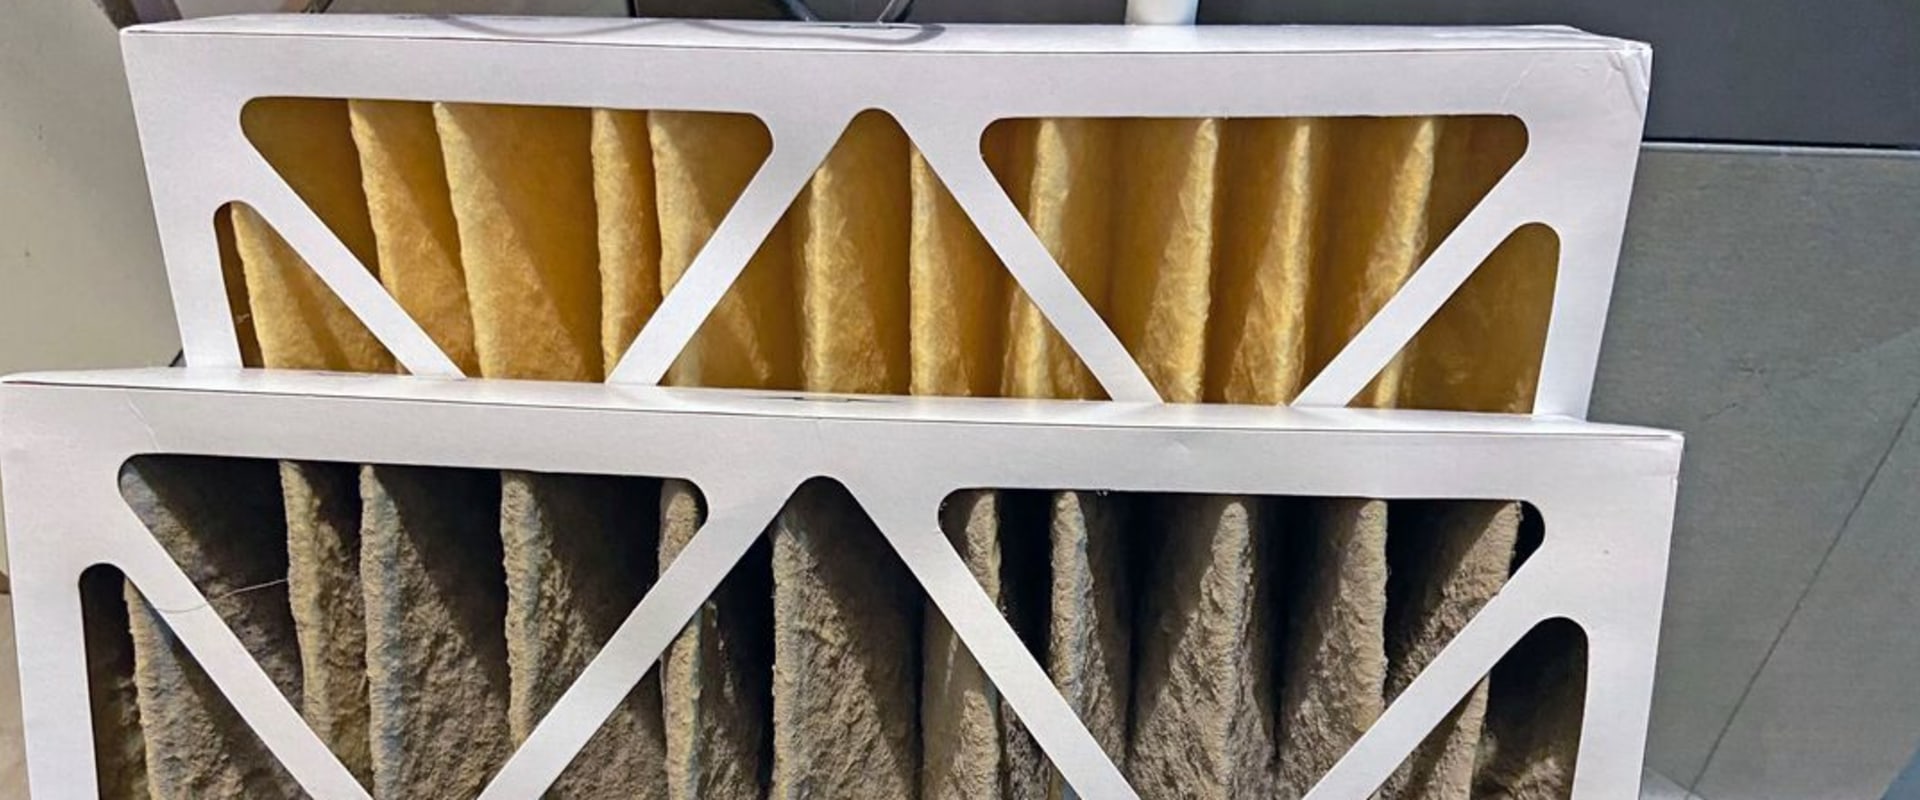 Can I Use a 4 Inch Furnace Filter Instead of 5?